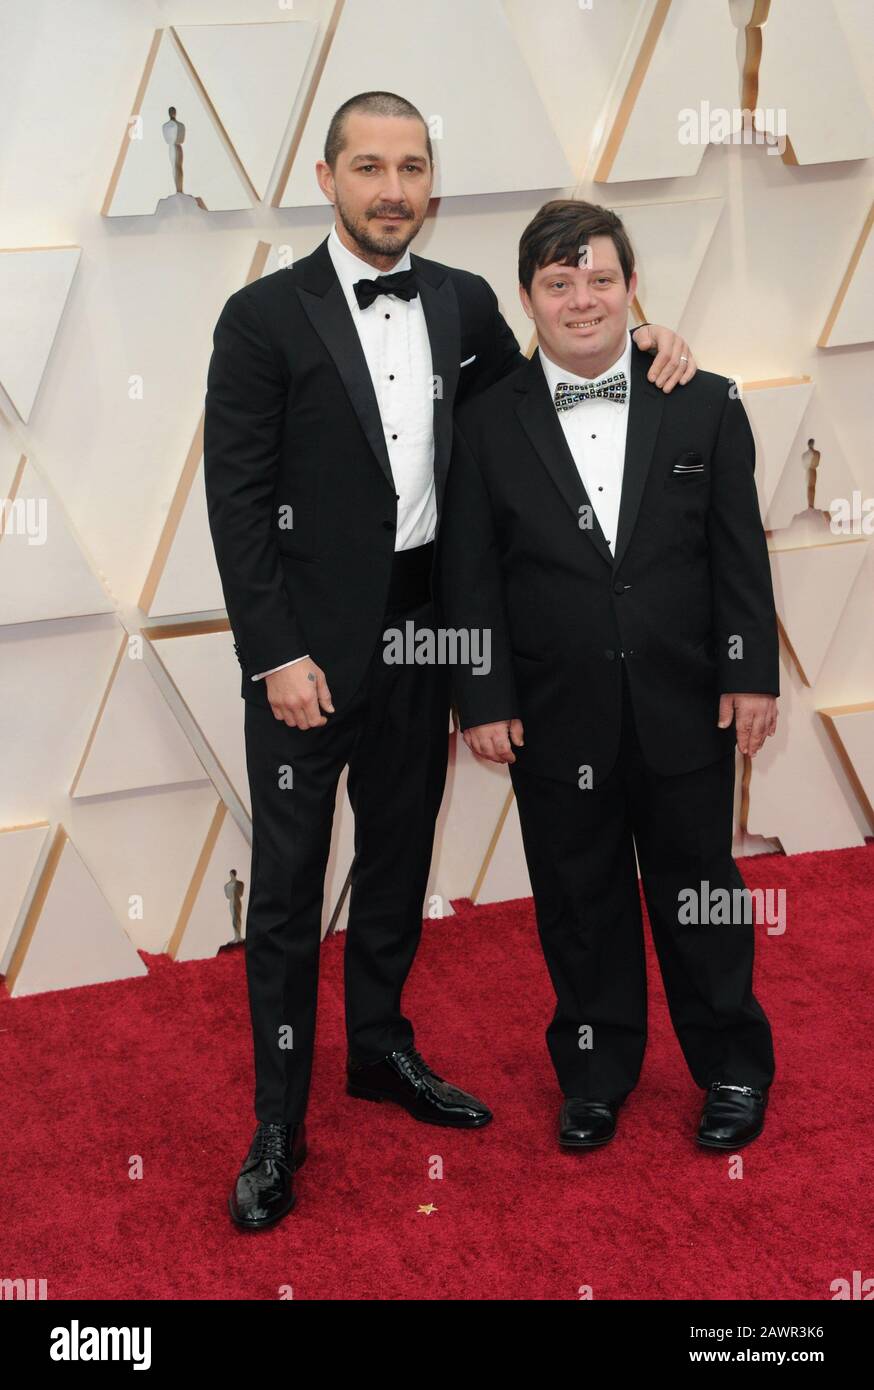 Los Angeles, CA. 9th Feb, 2020. at arrivals for The 92nd Academy Awards - Arrivals 2, The Dolby Theatre at Hollywood and Highland Center, Los Angeles, CA February 9, 2020. Credit: Elizabeth Goodenough/Everett Collection/Alamy Live News Stock Photo